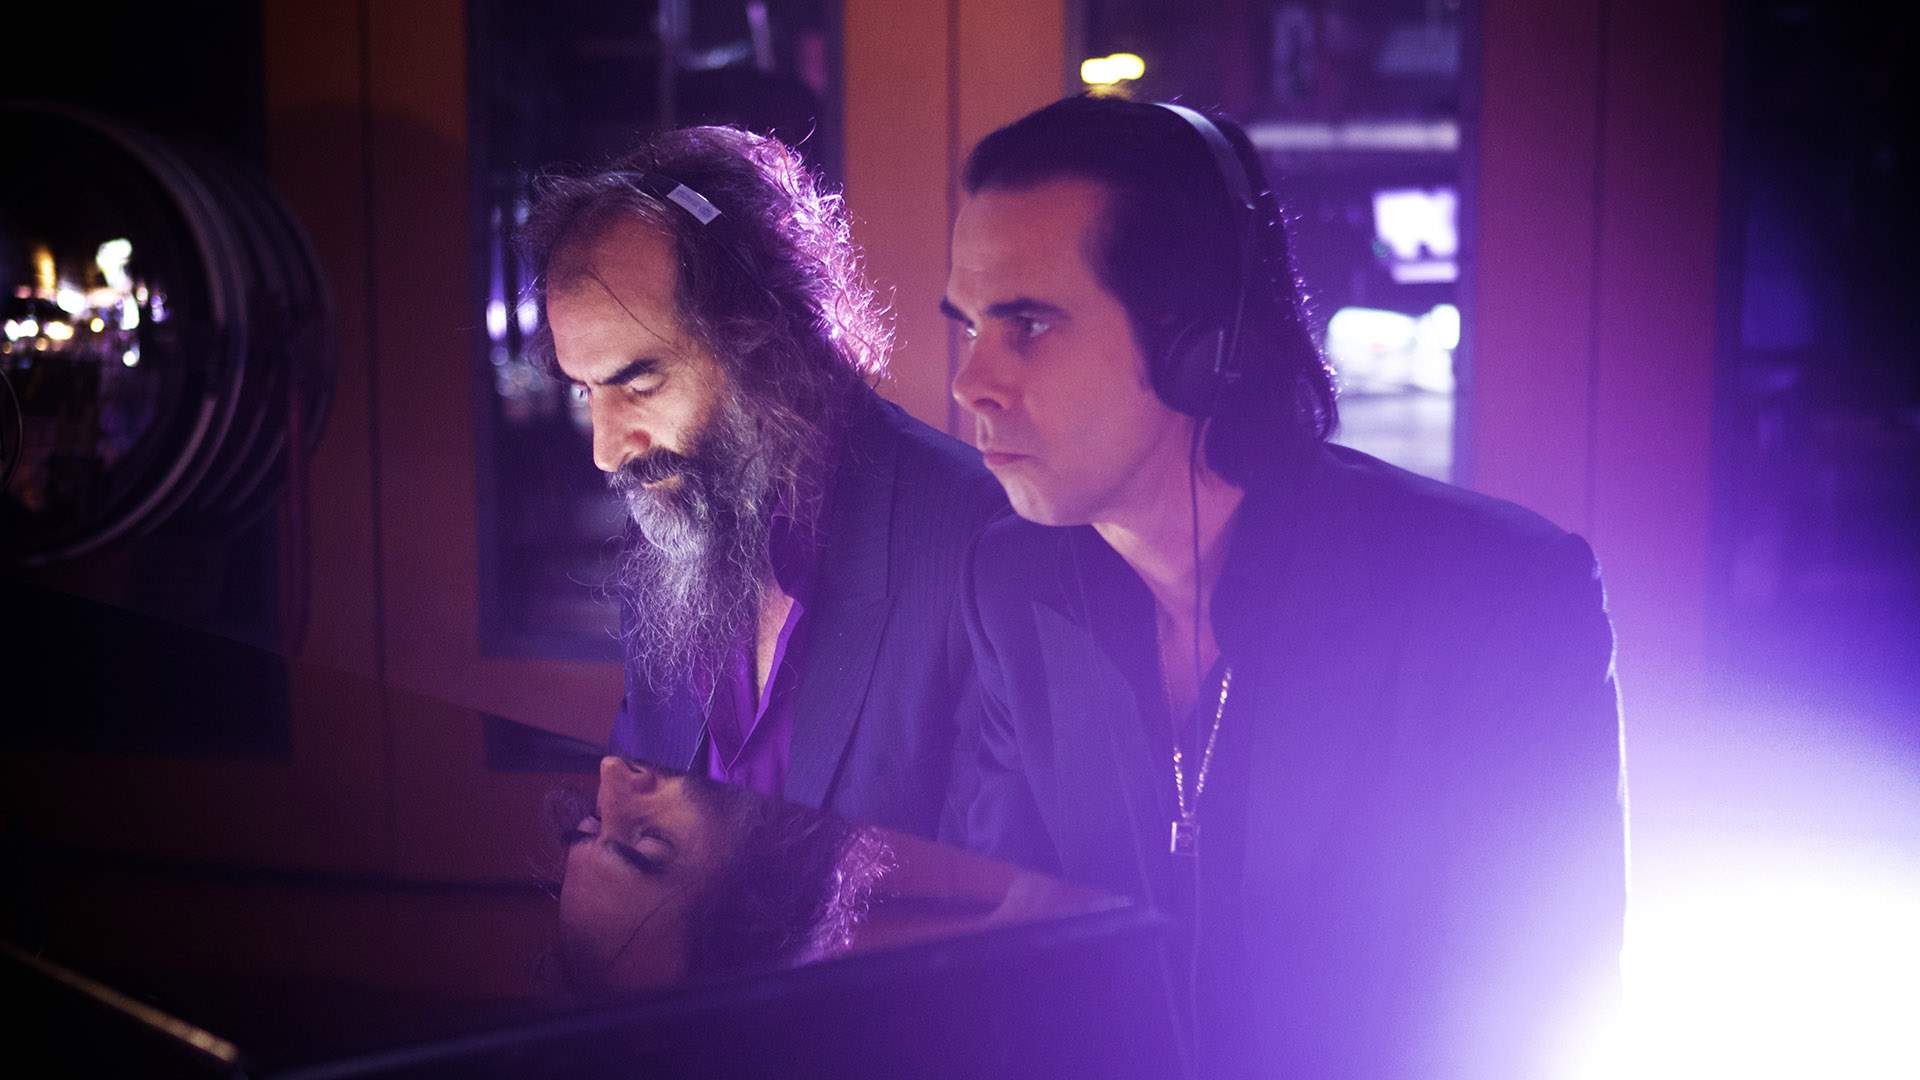 Nick Cave Has Revealed He's Touring Australia with Warren Ellis in November Via a Rogue Fan Email